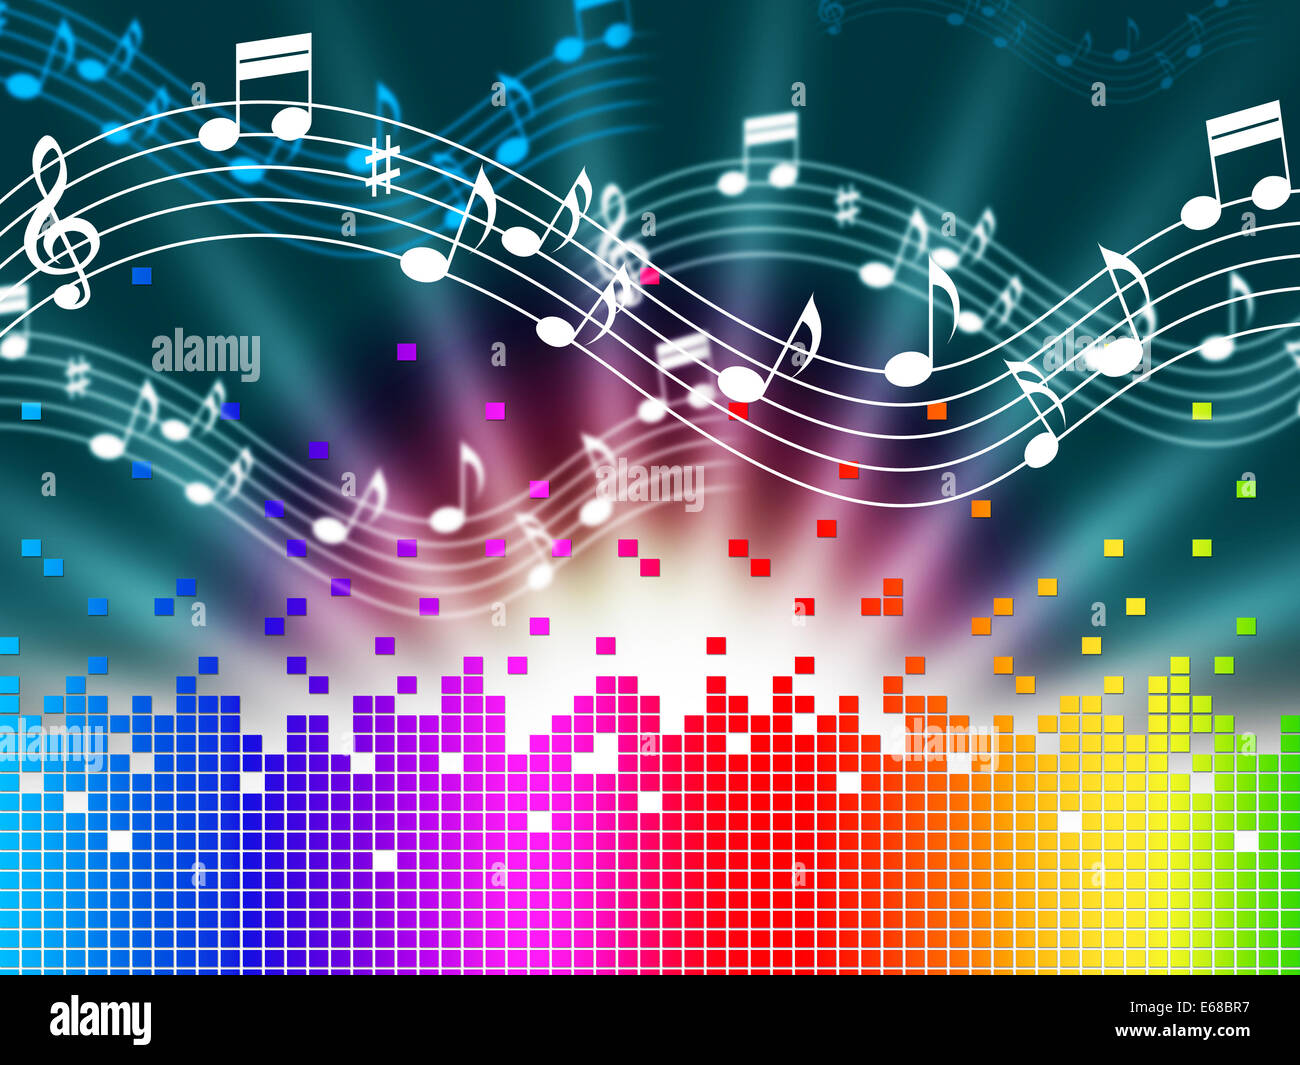 Rainbow Music Background Meaning Melody Singing And Soundwaves Stock Photo  - Alamy